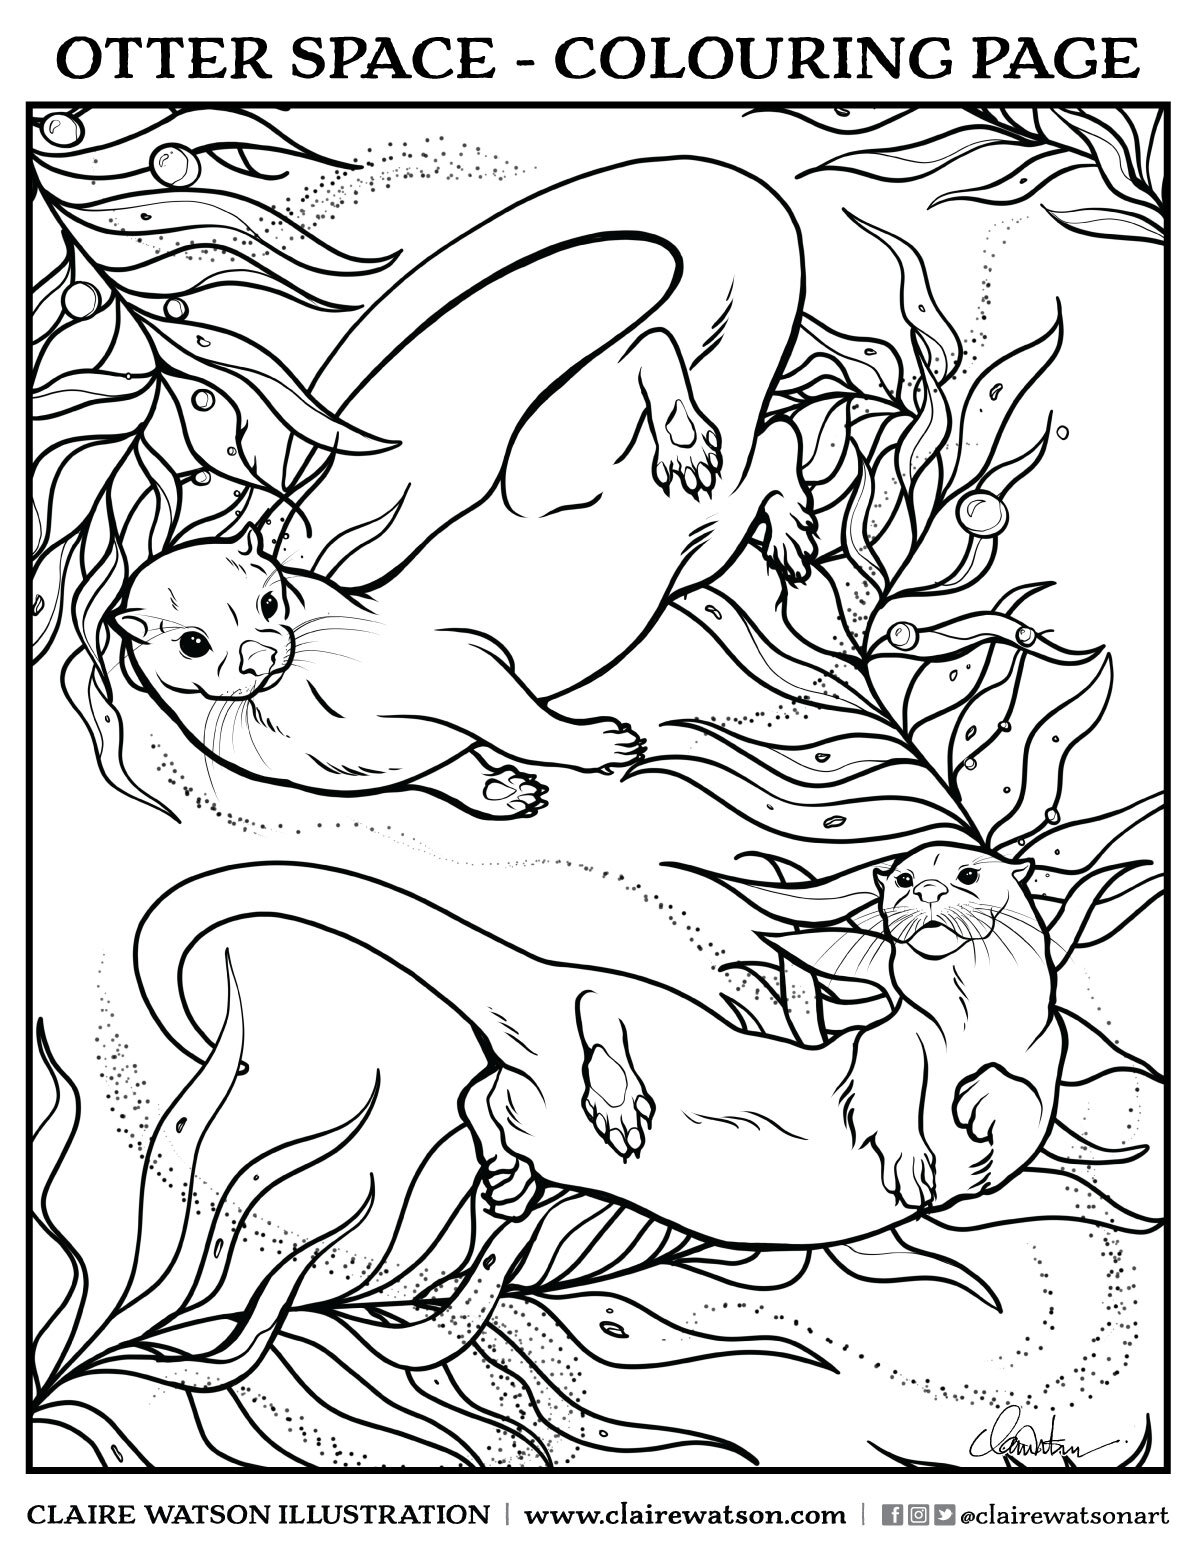 Otter Space - Colouring Page — CLAIRE VICTORIA // Art, Illustration and  Design